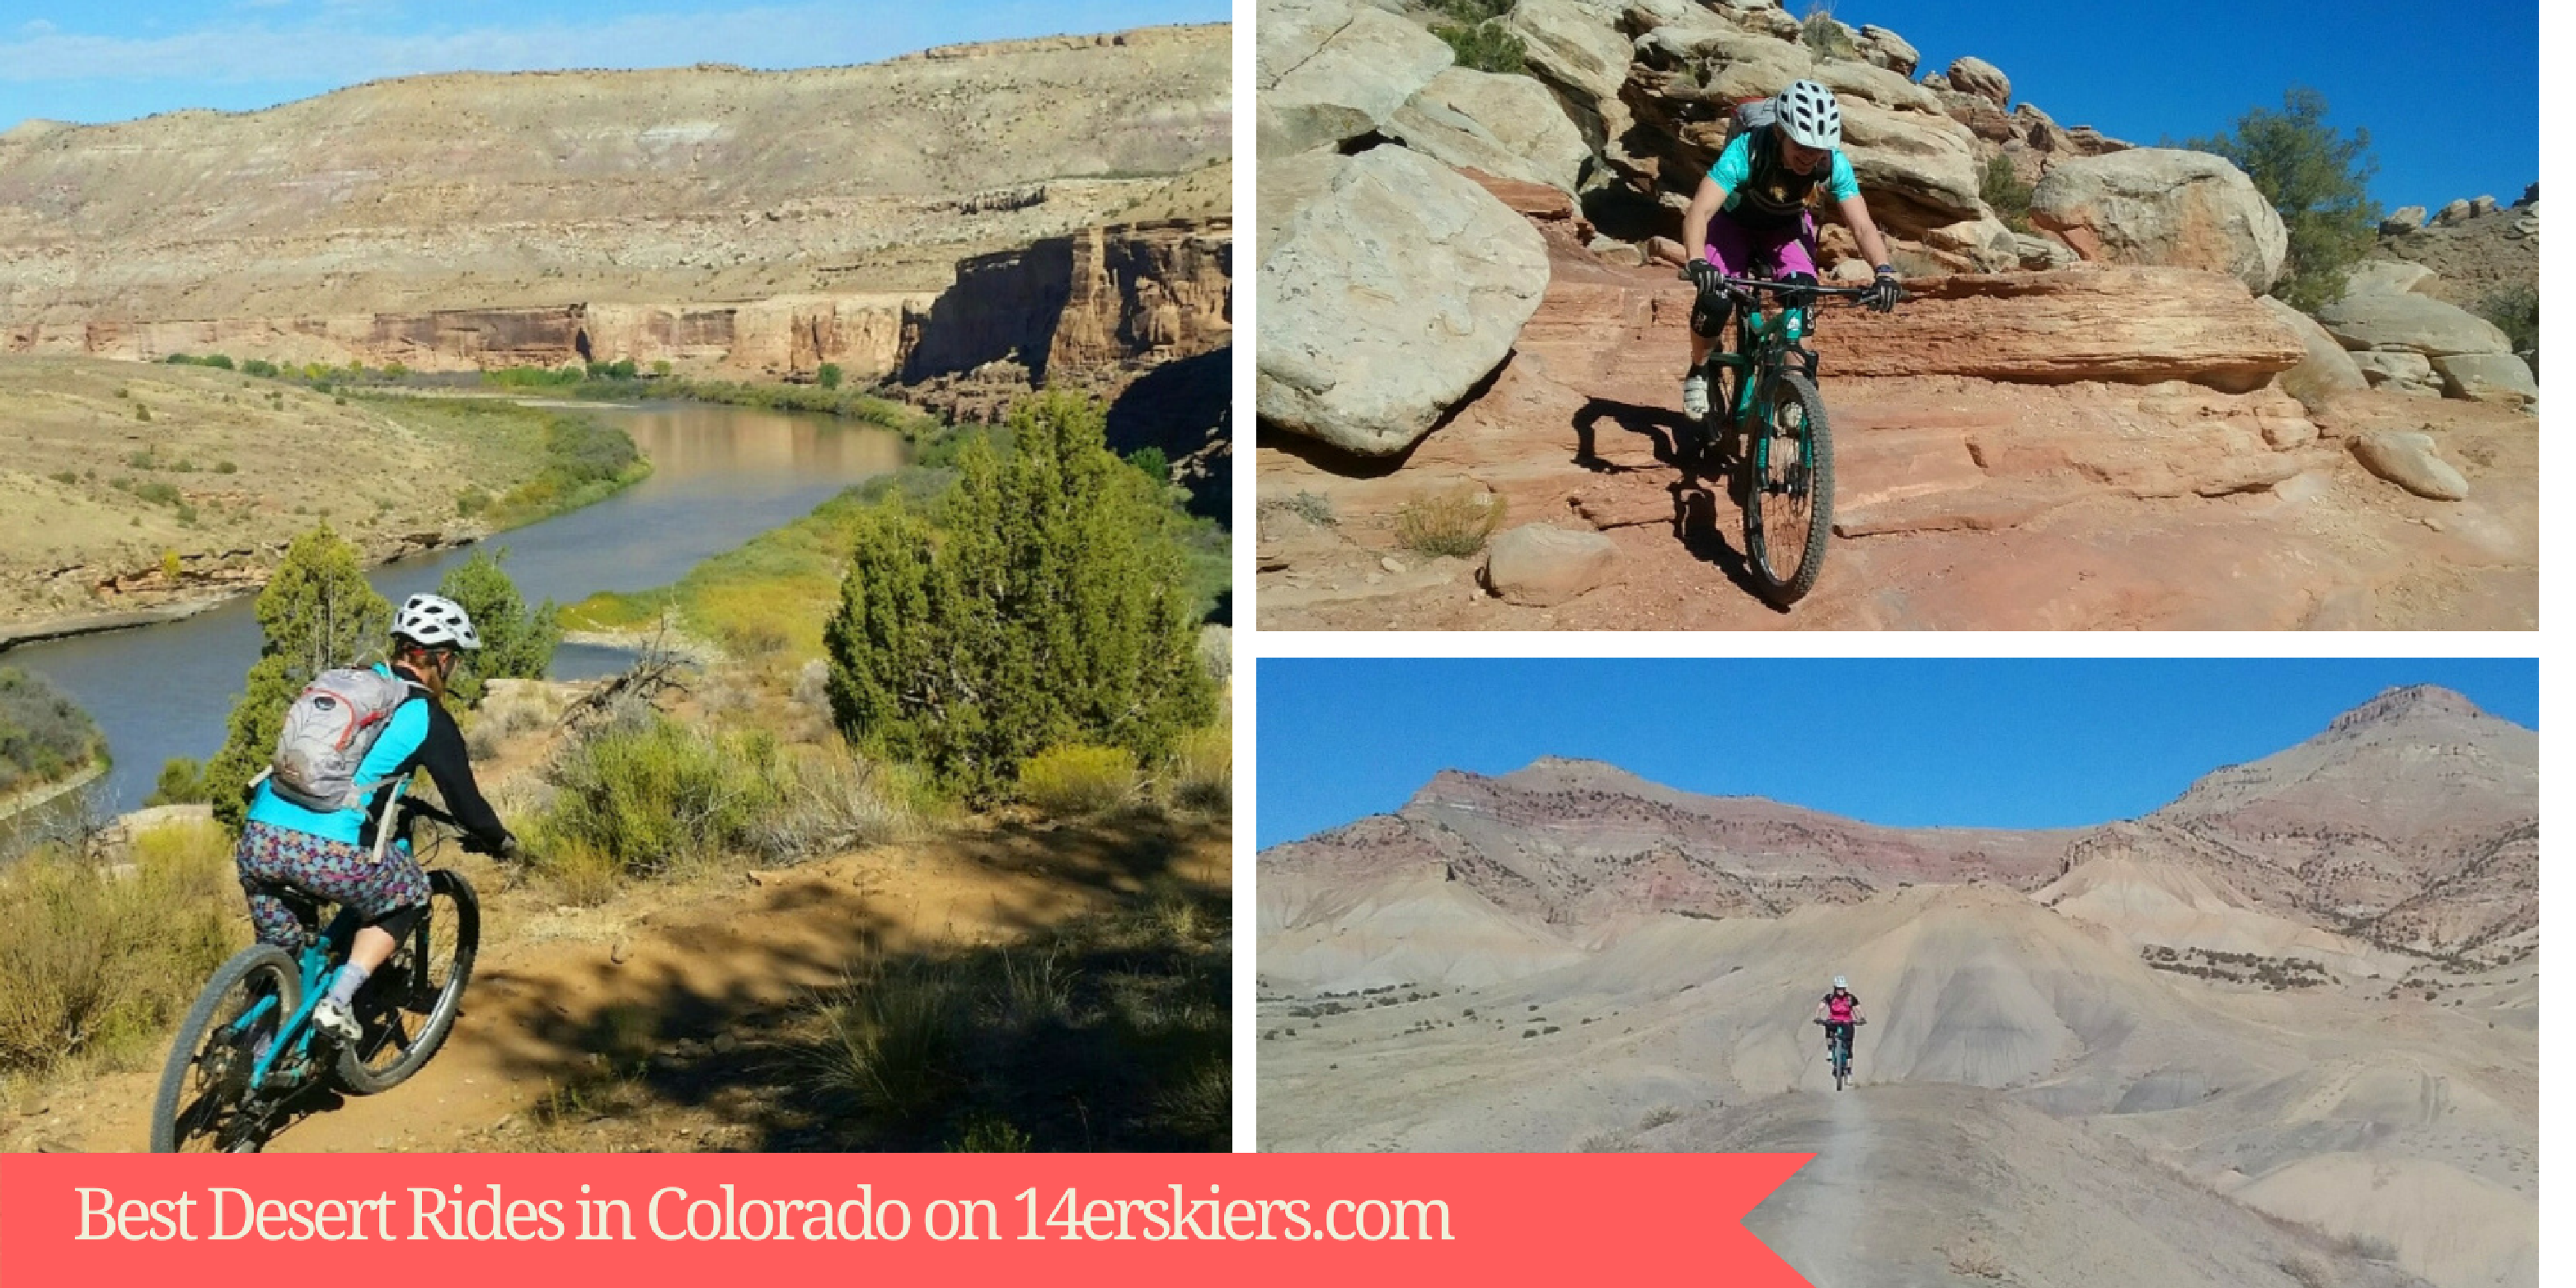 Best Desert Rides in Colorado (West of the Continental Divide)